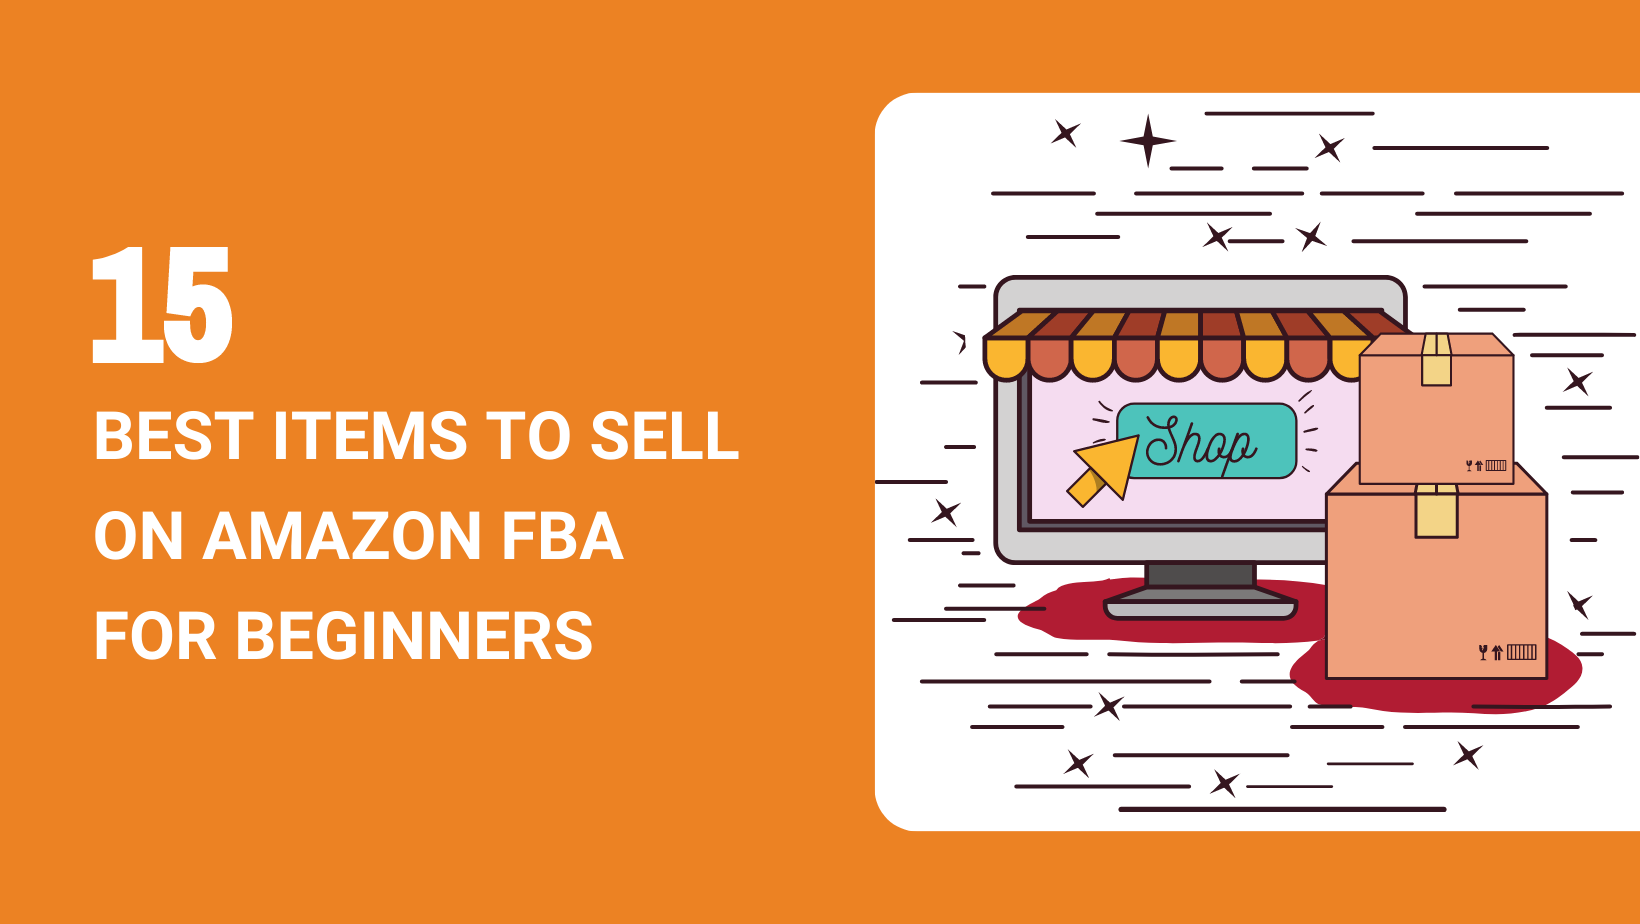 https://cdn.nichedropshipping.com/wp-content/uploads/2023/06/15-BEST-ITEMS-TO-SELL-ON-AMAZON-FBA-FOR-BEGINNER.png